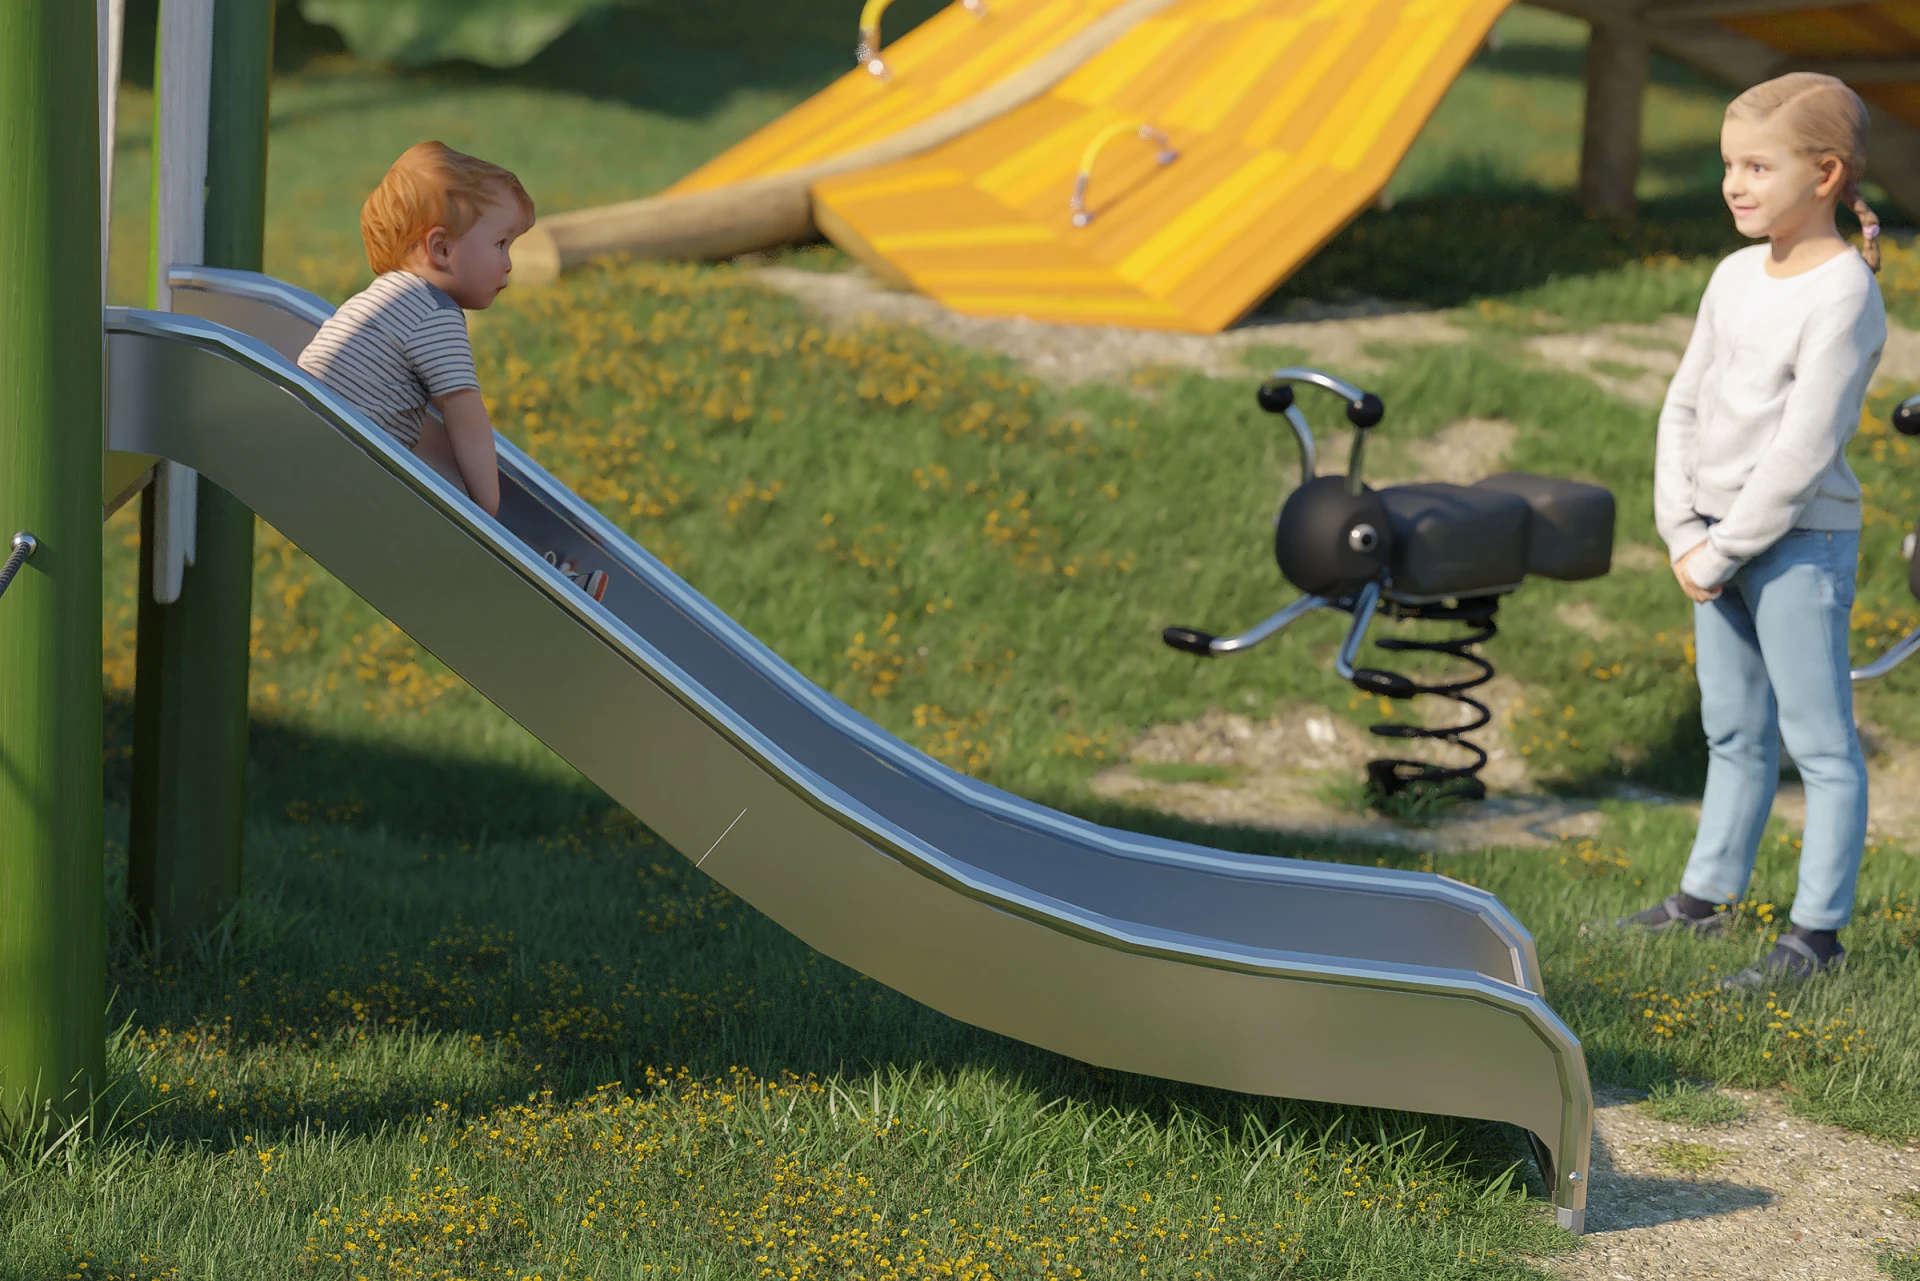 A child sliding on a themed playground